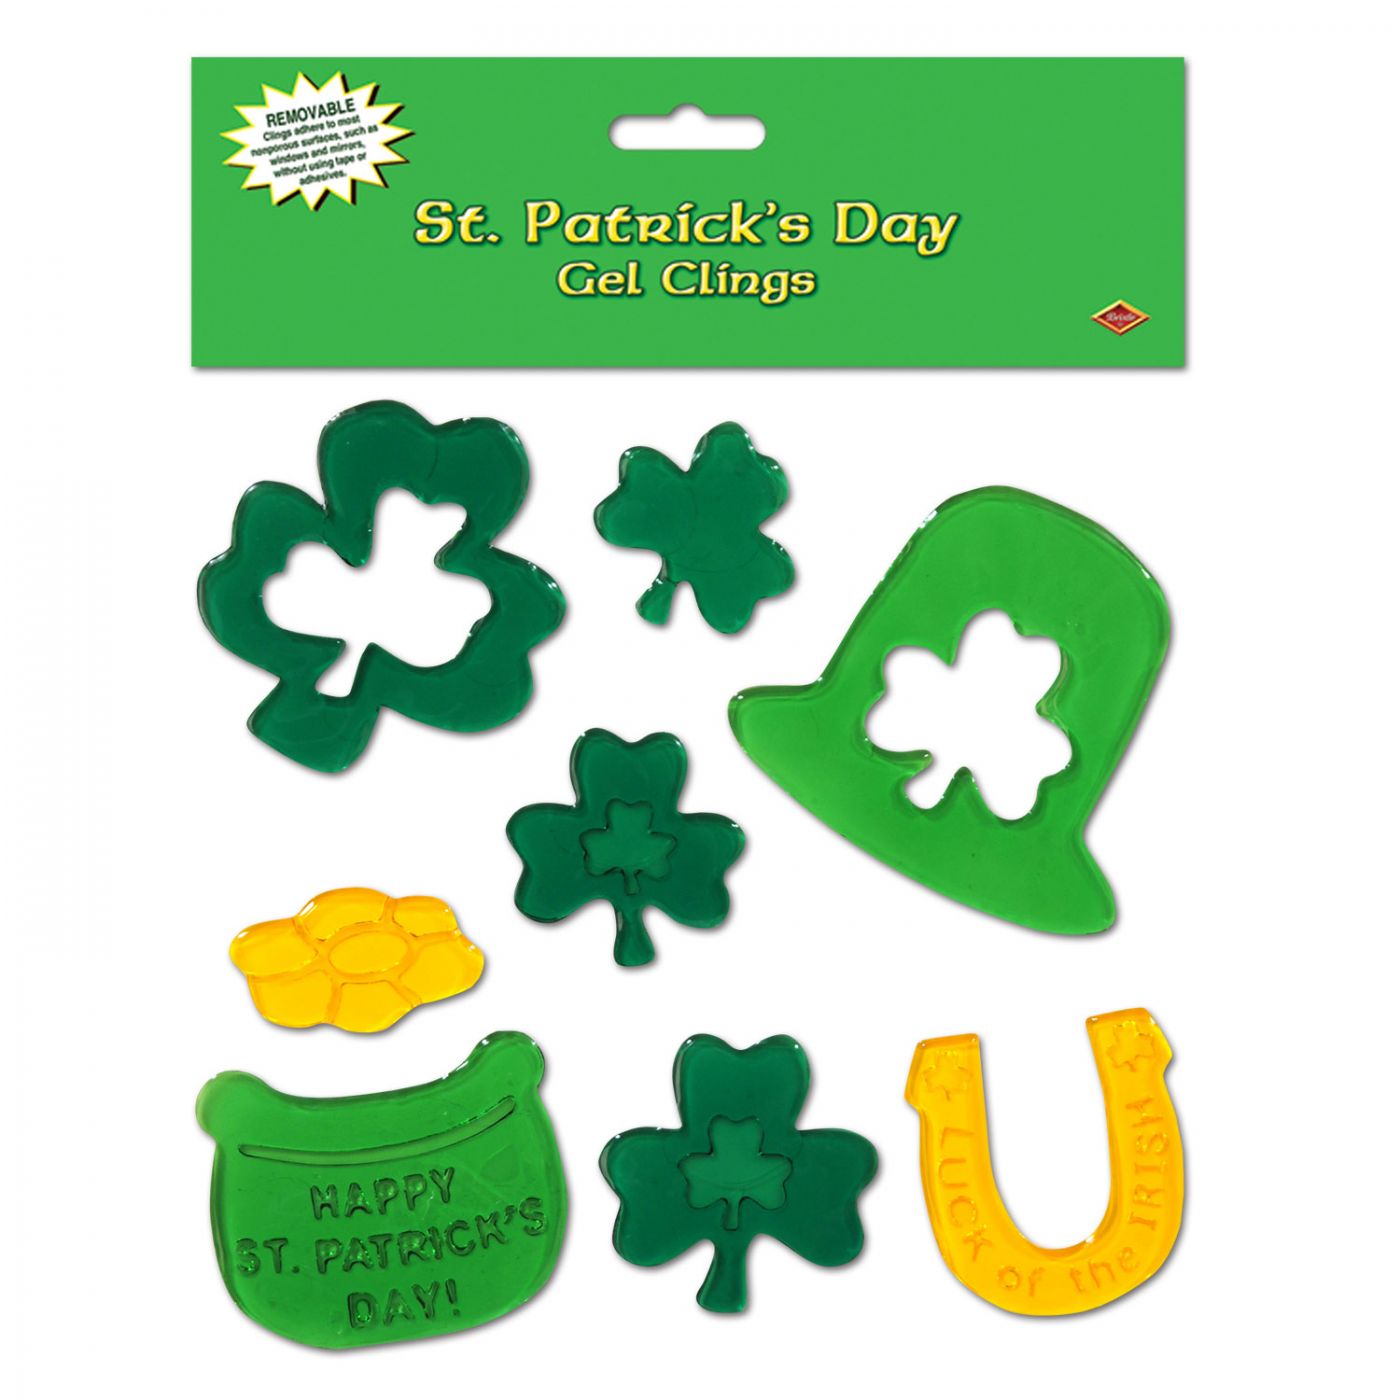 St Patrick's Day Gel Clings image